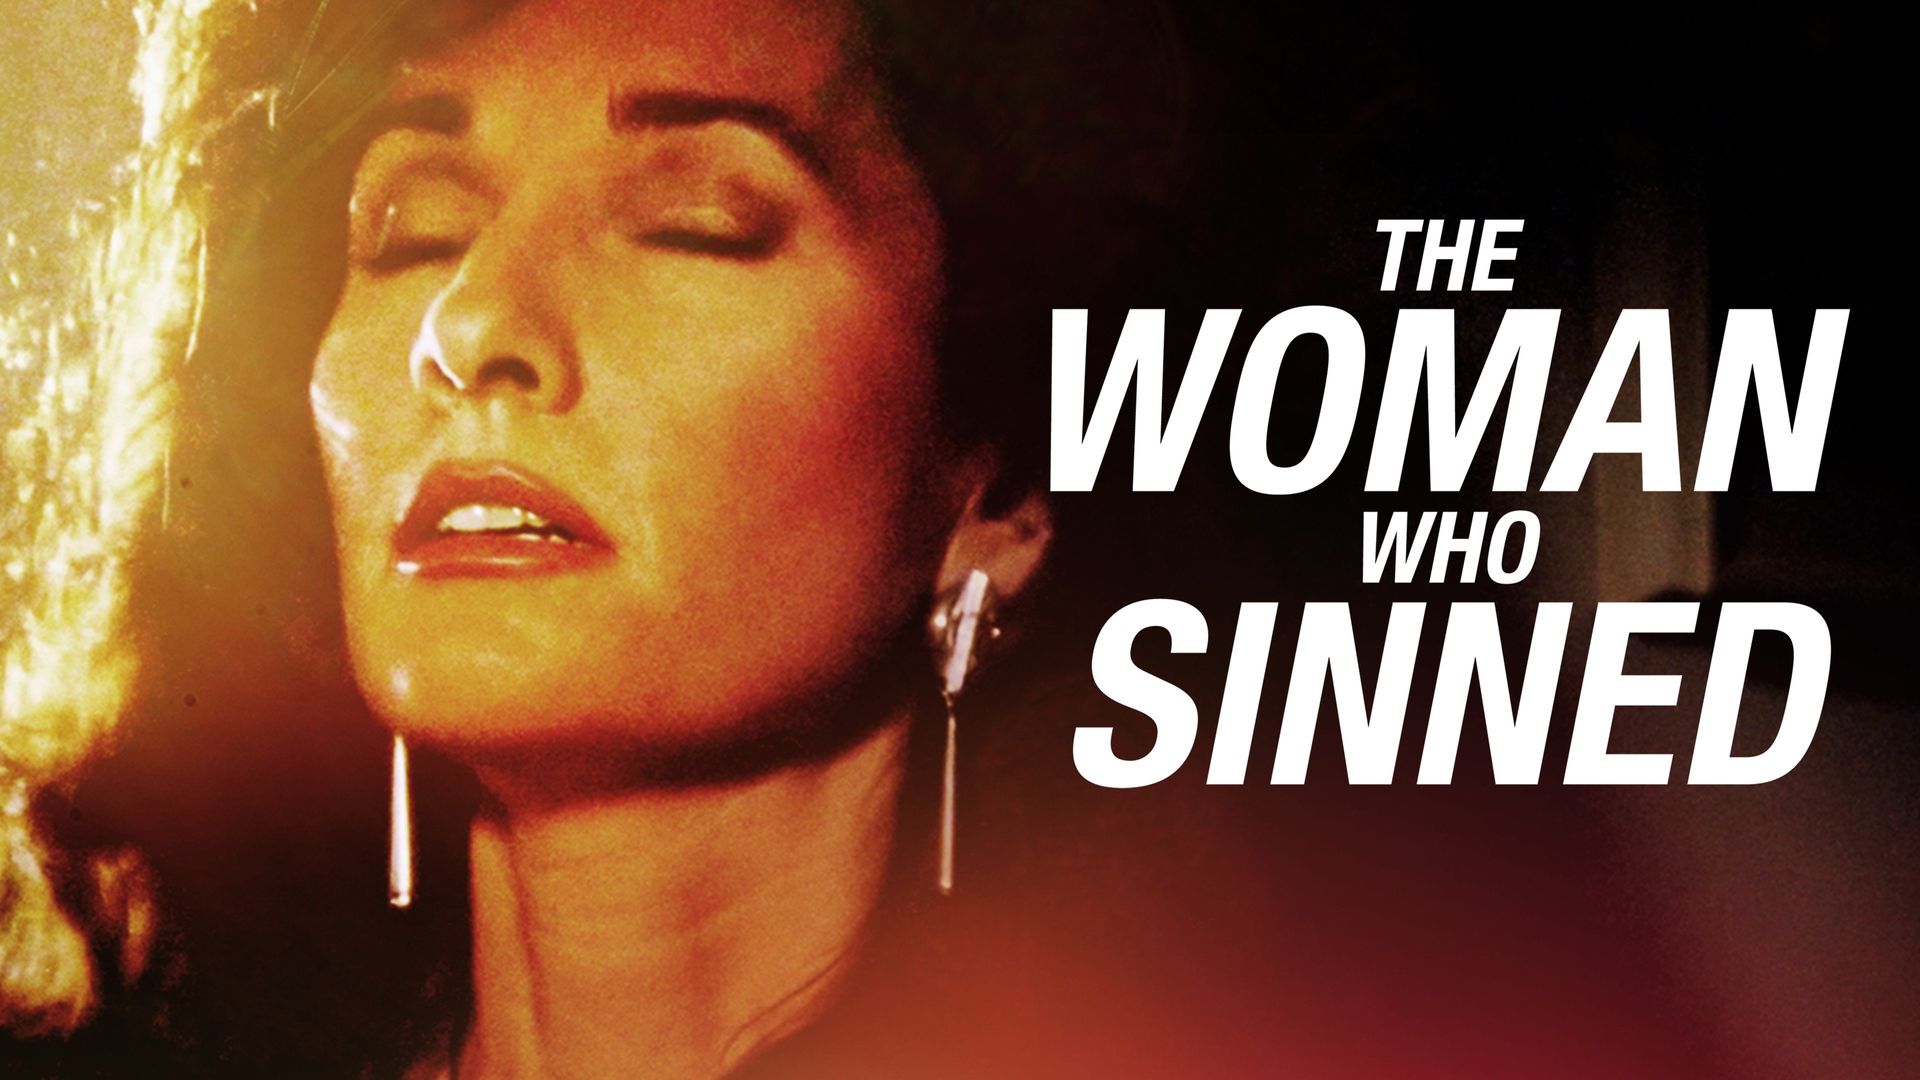 The Woman Who Sinned Backdrop